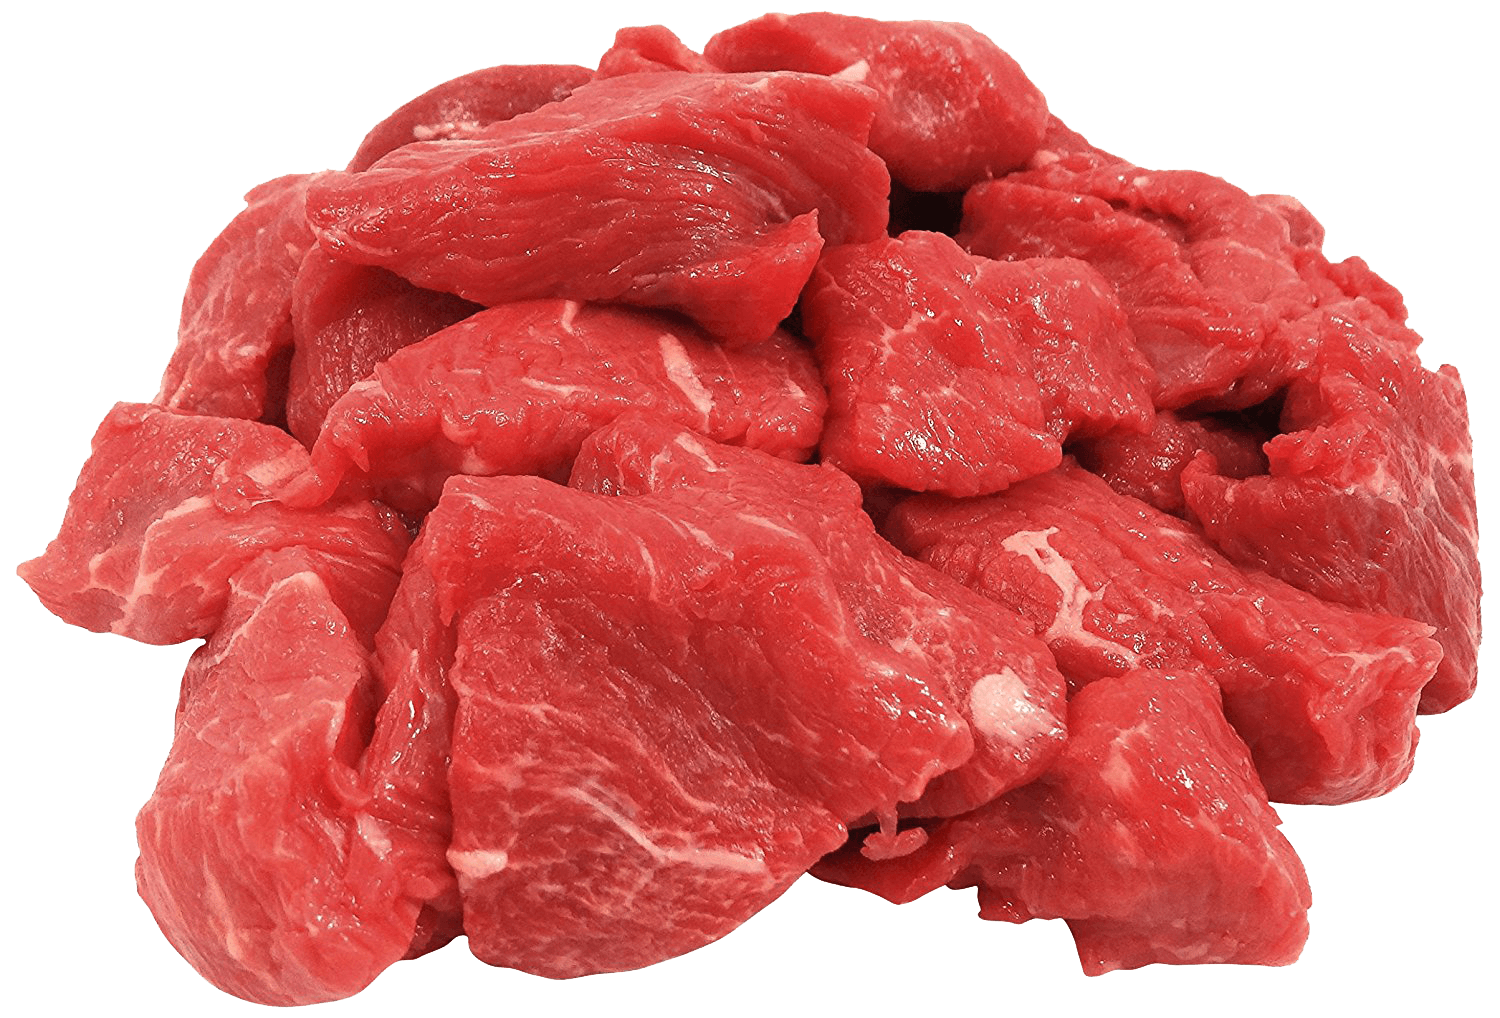 Fresh Local Meat Delivery - Black Angus Beef Stew (Cubed Stew Meat) Cut Fresh Daily (2 Pound)  - Shipping Included